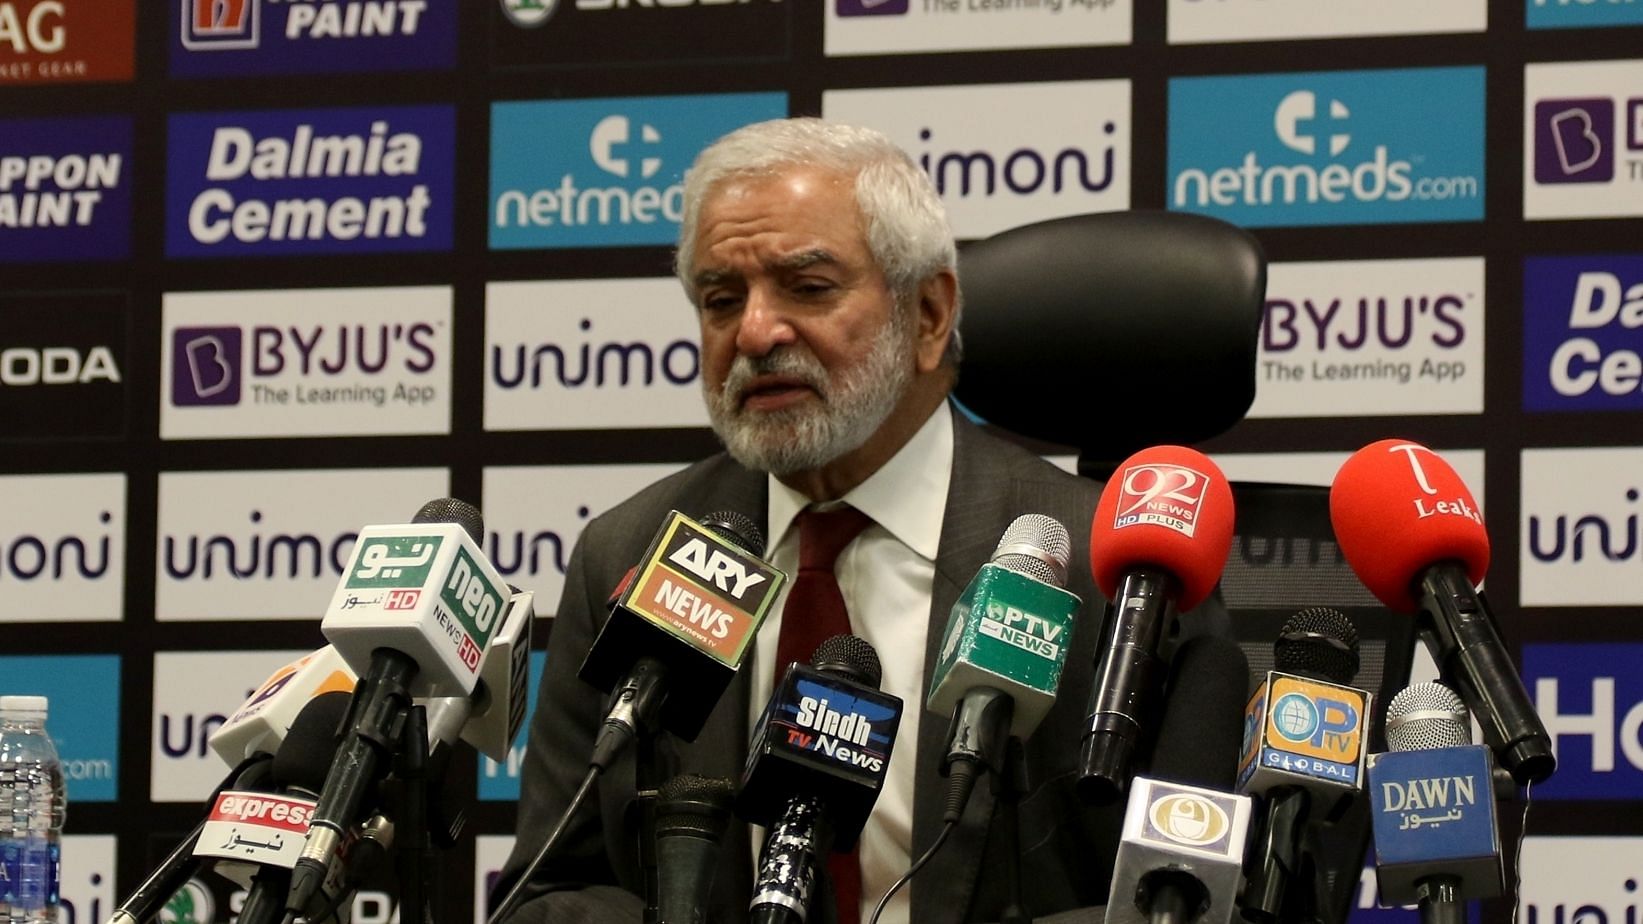 Pakistan are ready to play a bilateral series with India whenever the latter is ready, said PCB chairman Ehsan Mani.